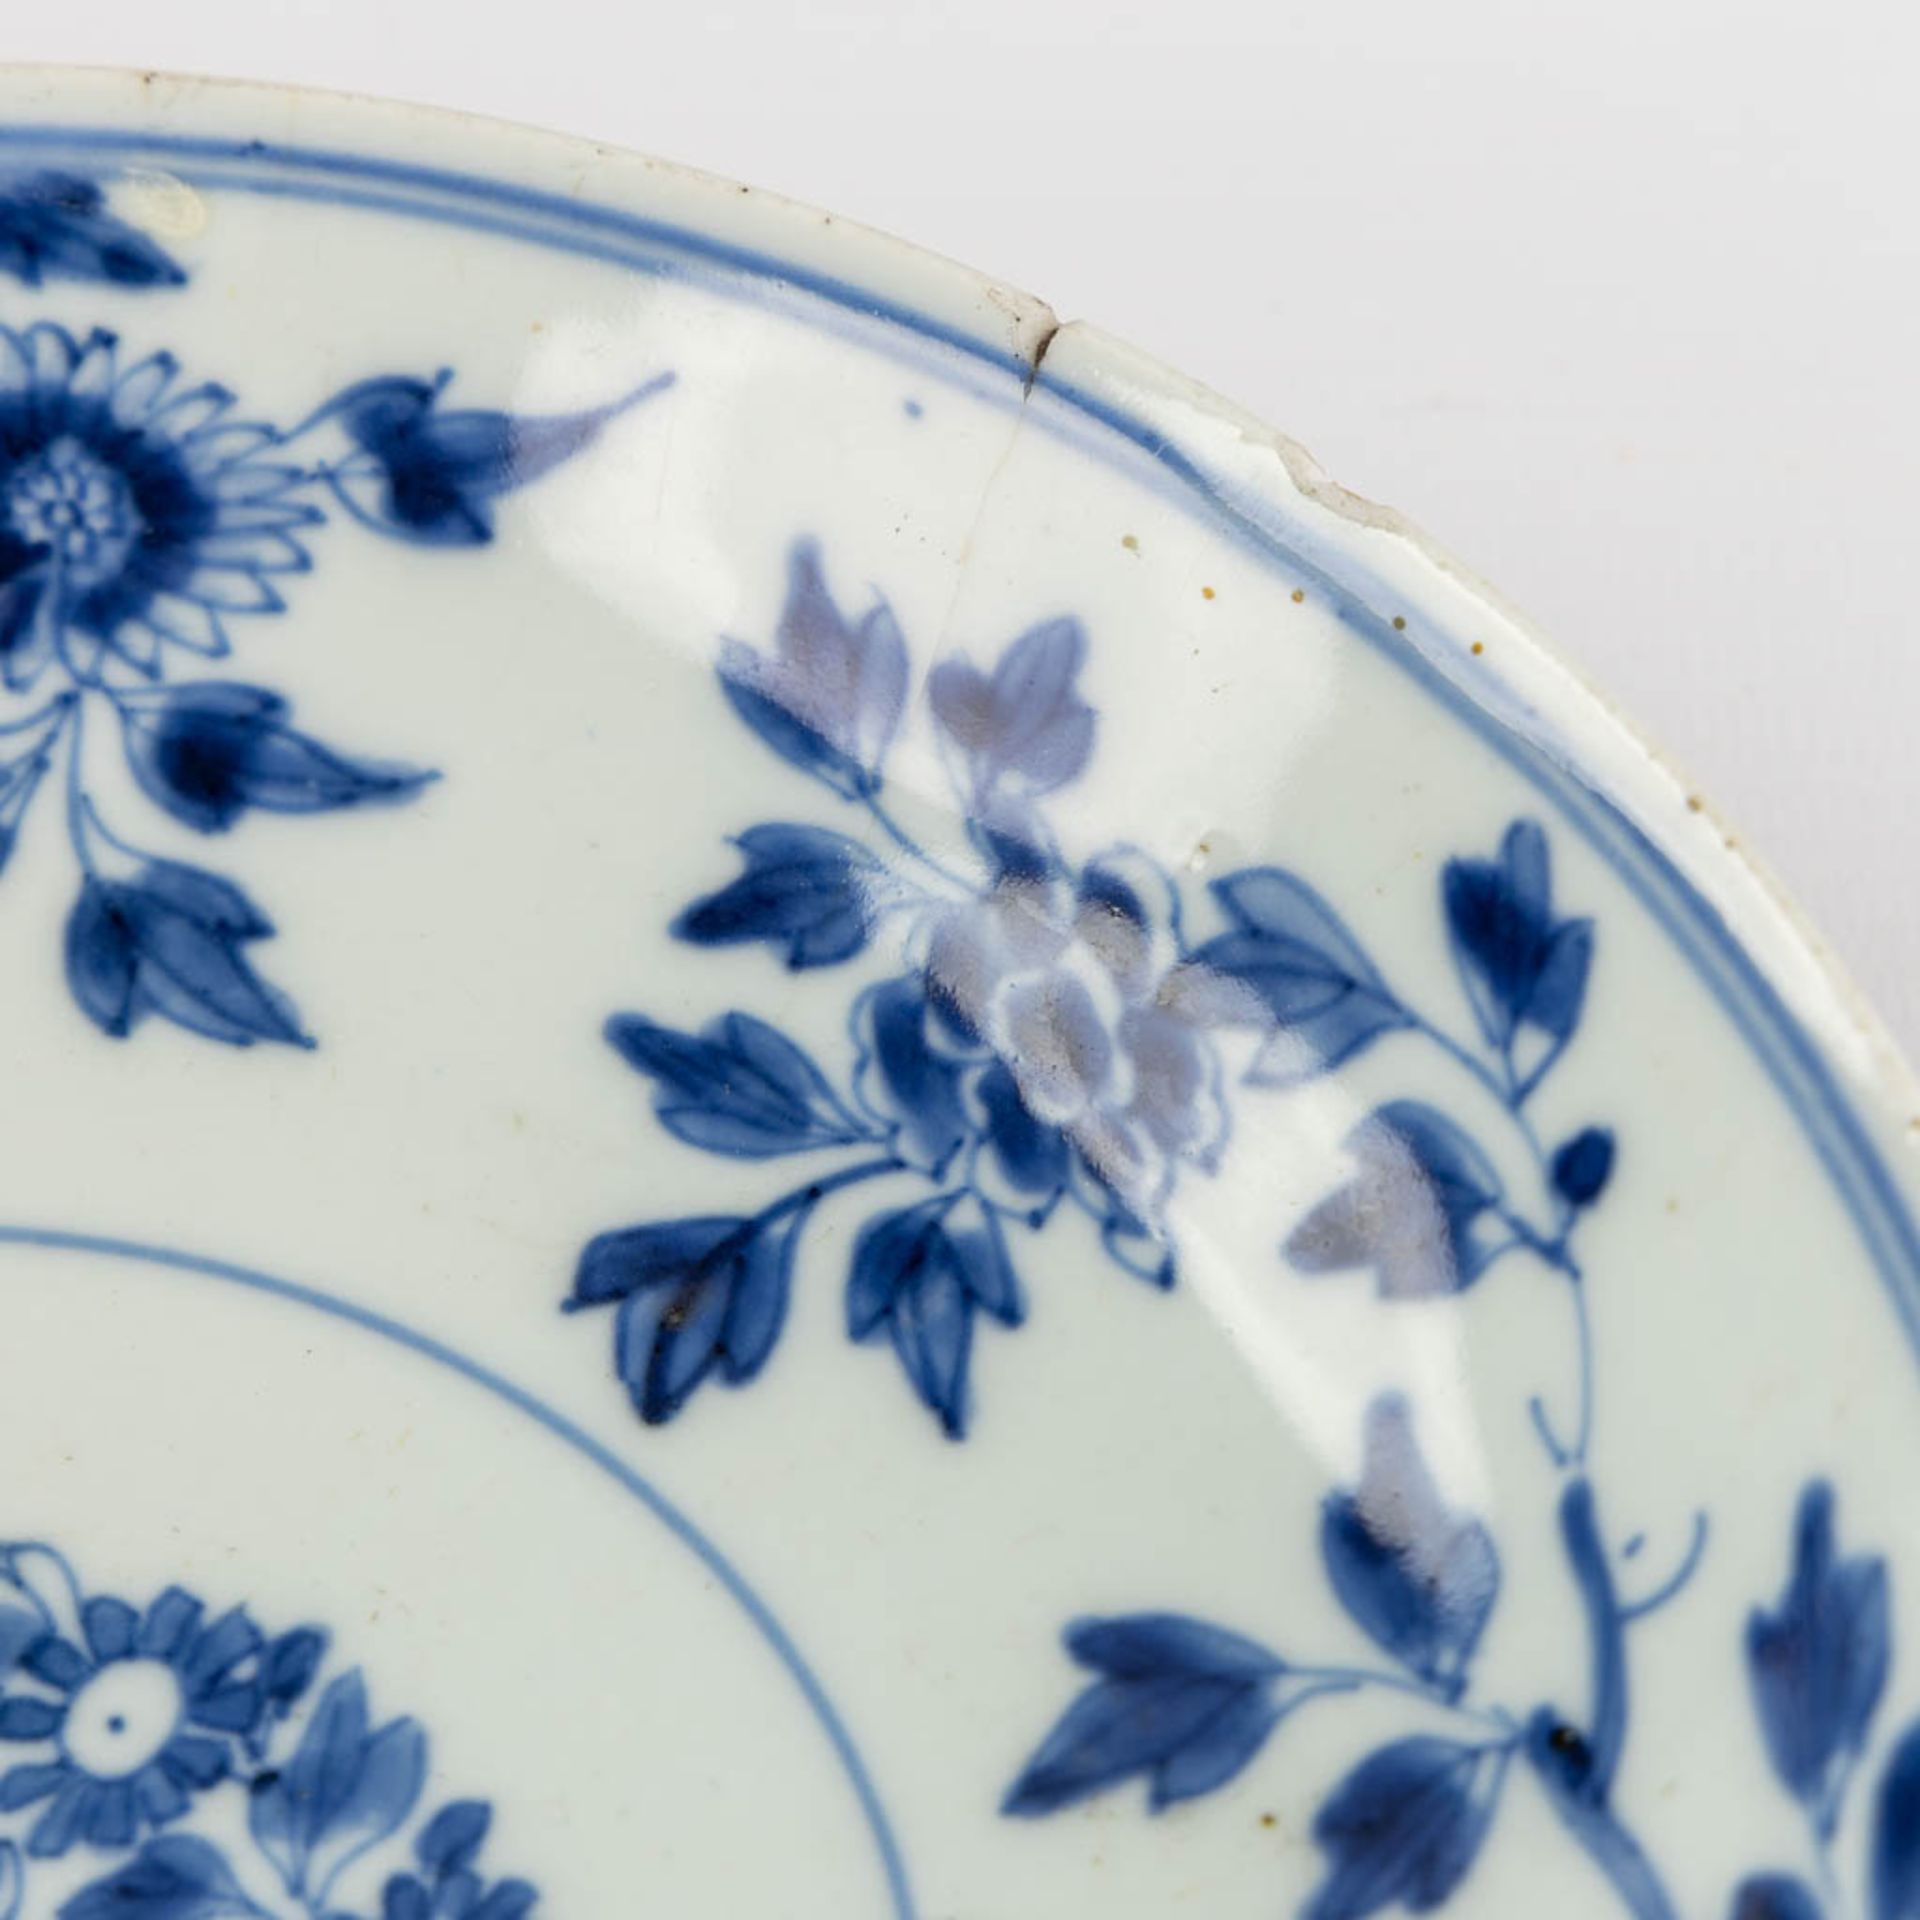 Fifteen Chinese cups, saucers and plates, blue white and Famille Roze. (D:23,4 cm) - Image 8 of 15